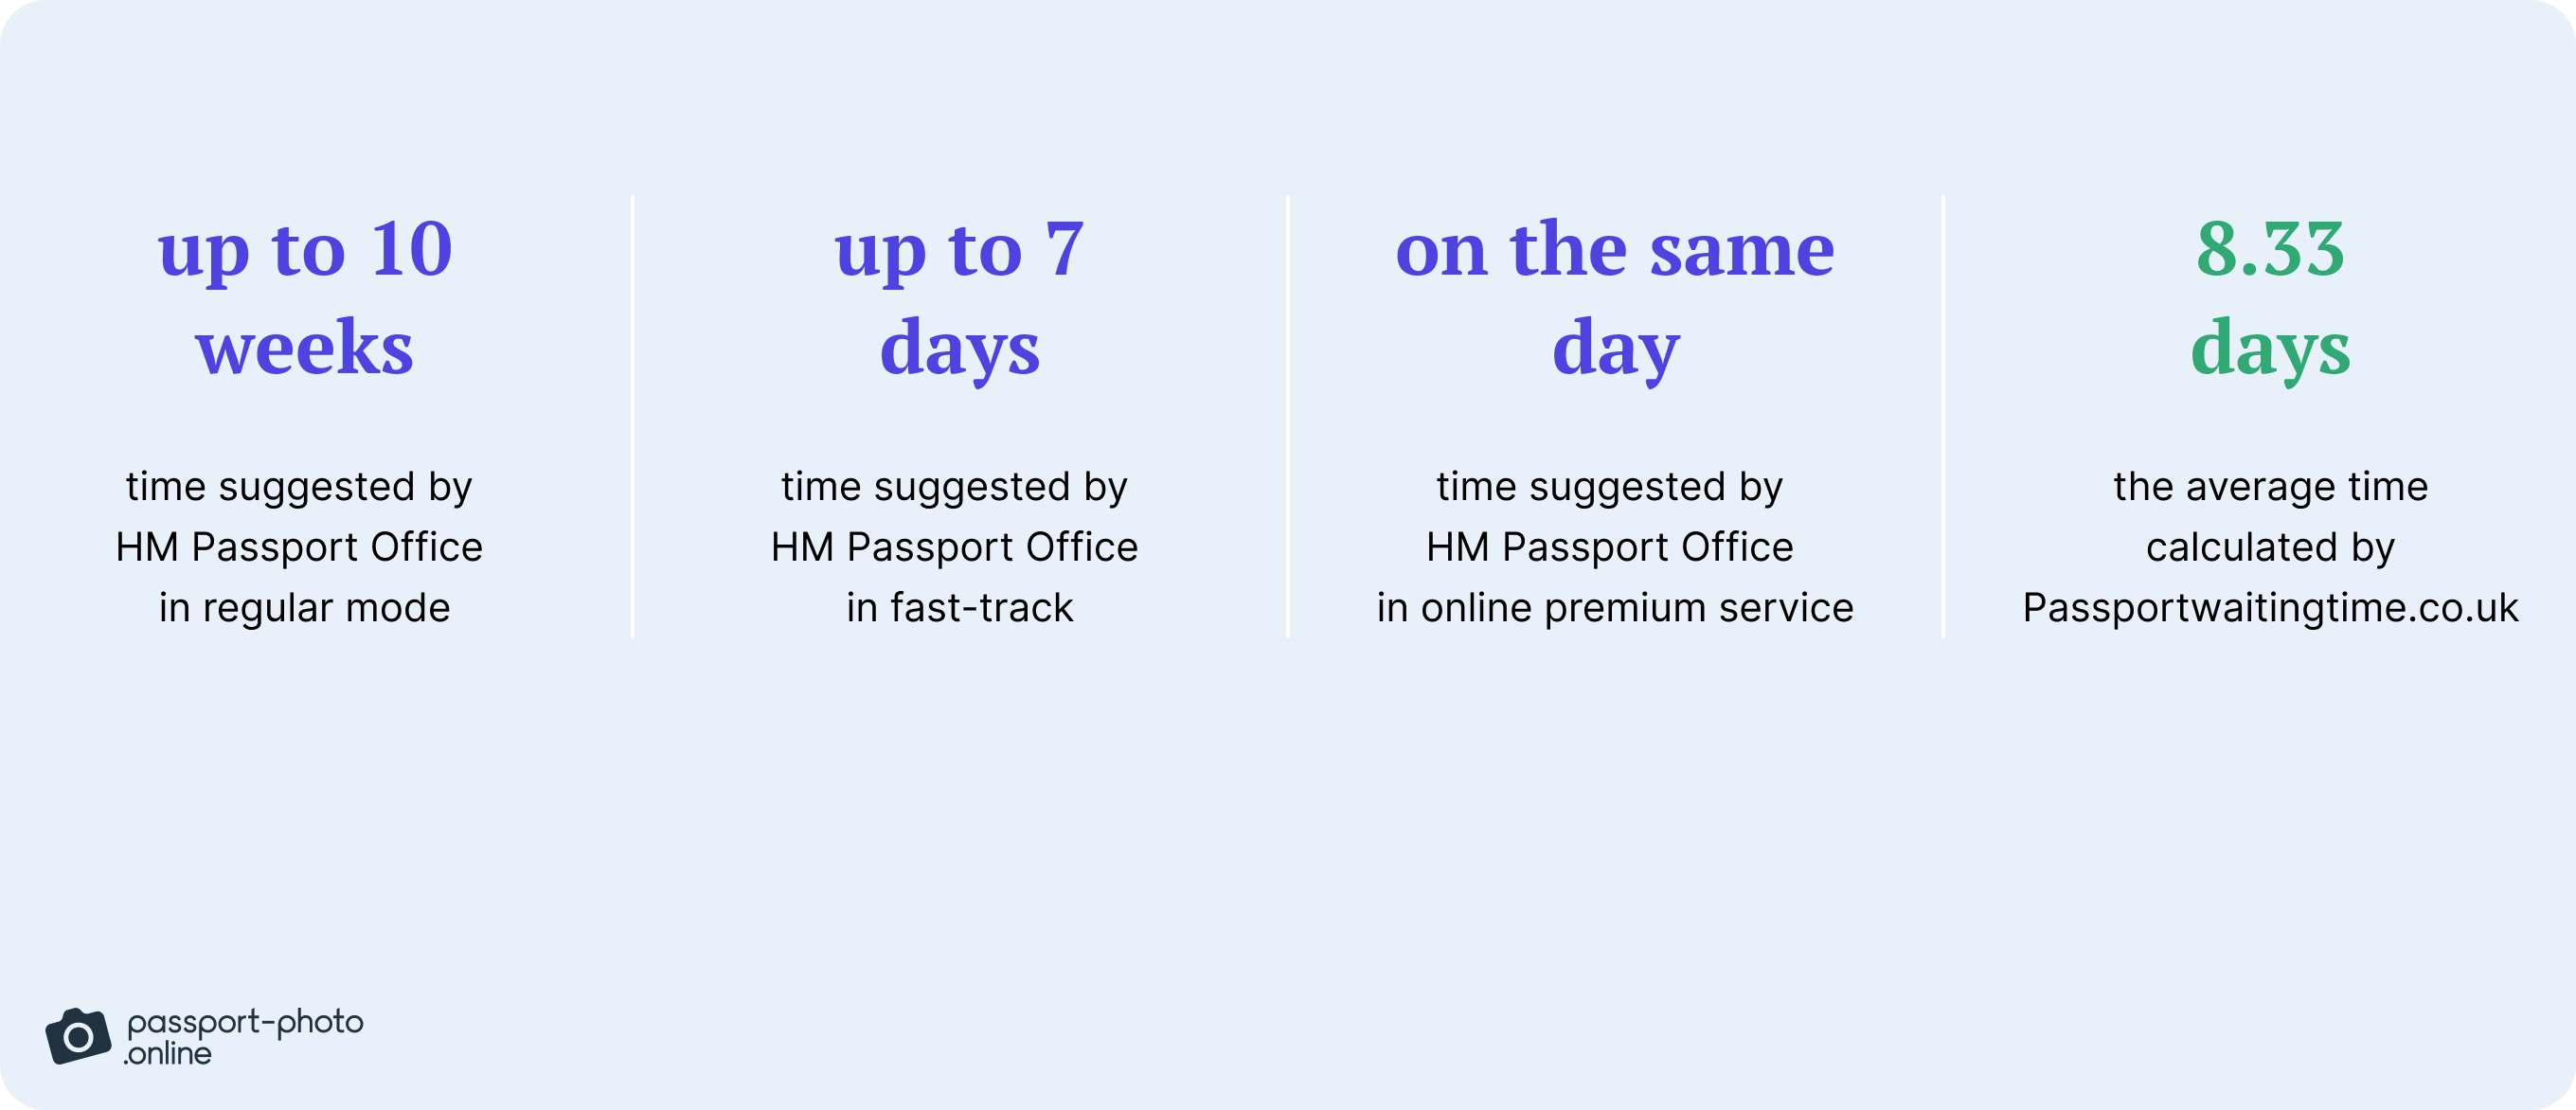 The average waiting time for different passport renewal processes in the UK.